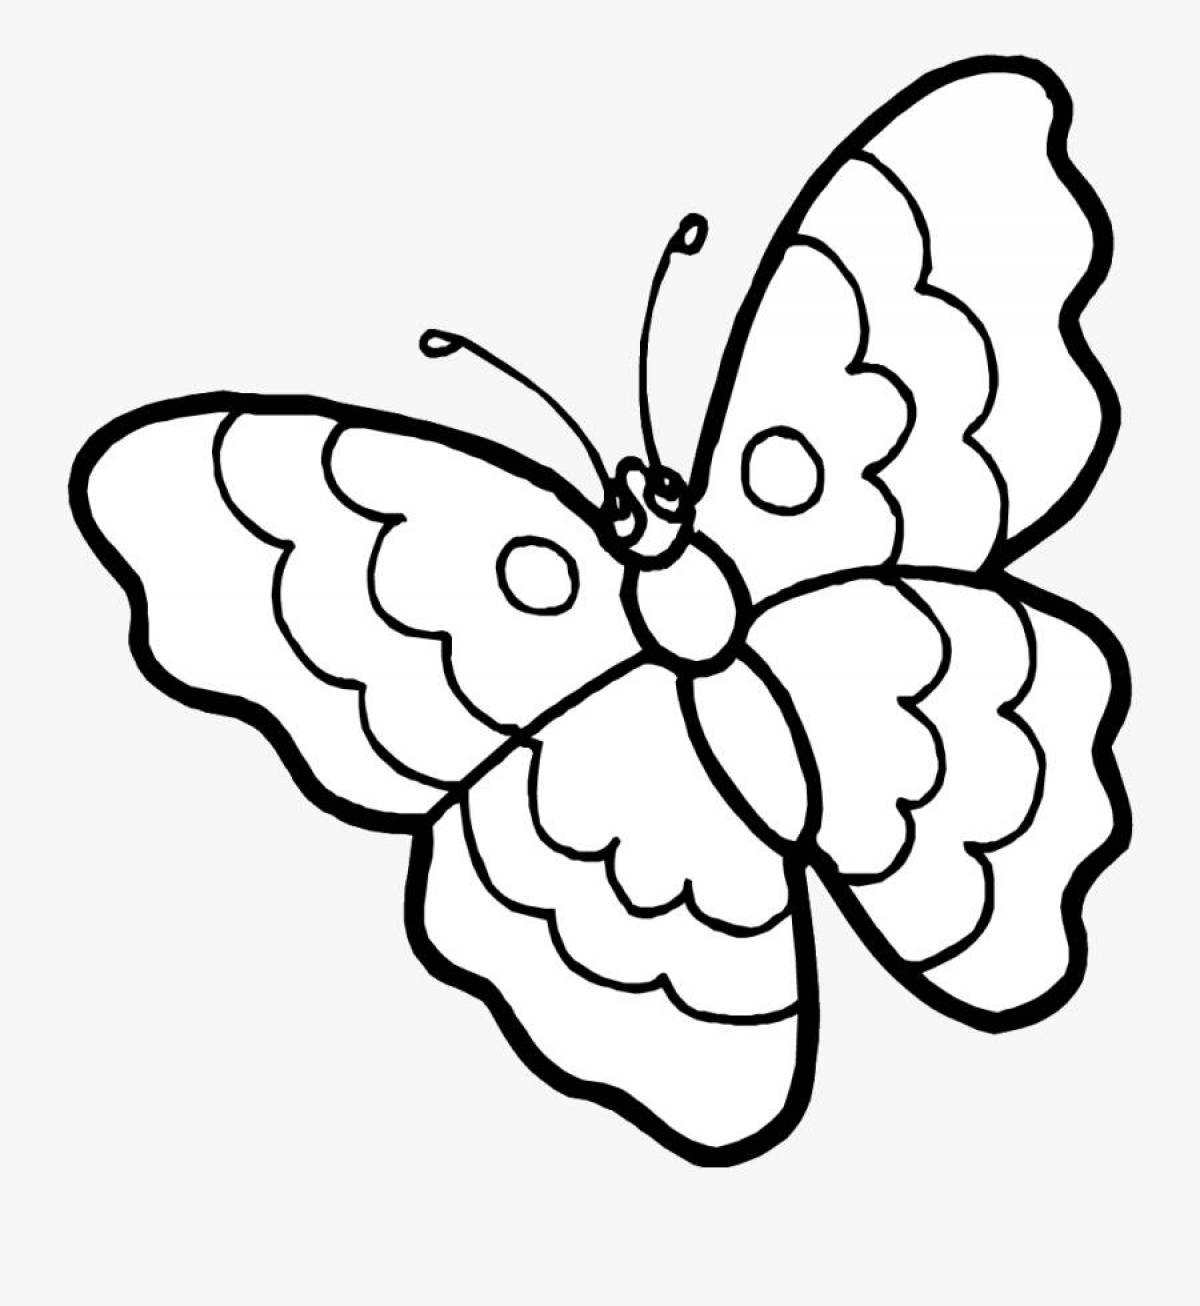 Bright butterfly coloring book